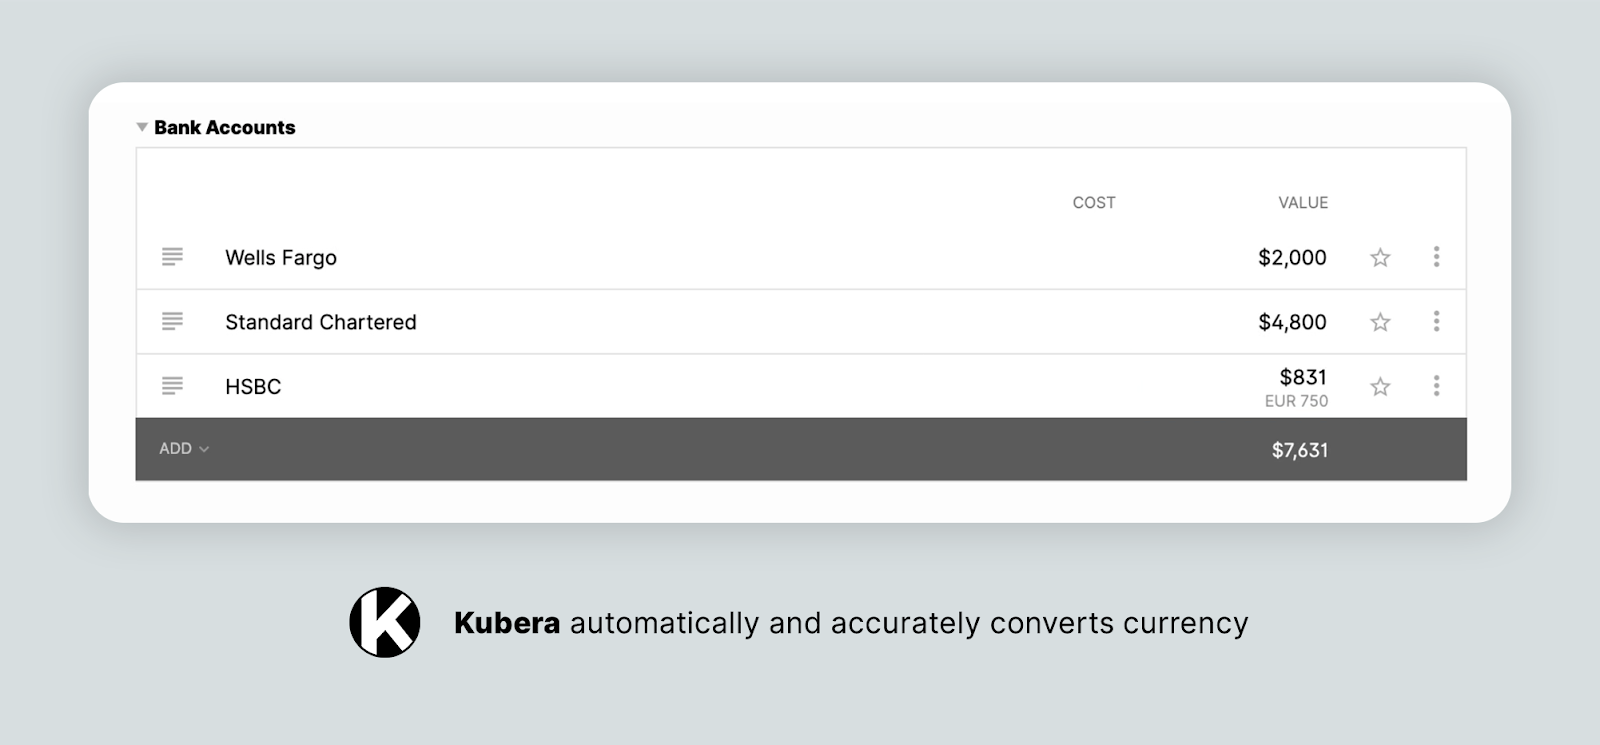 Kubera automatically and accurately converts currency